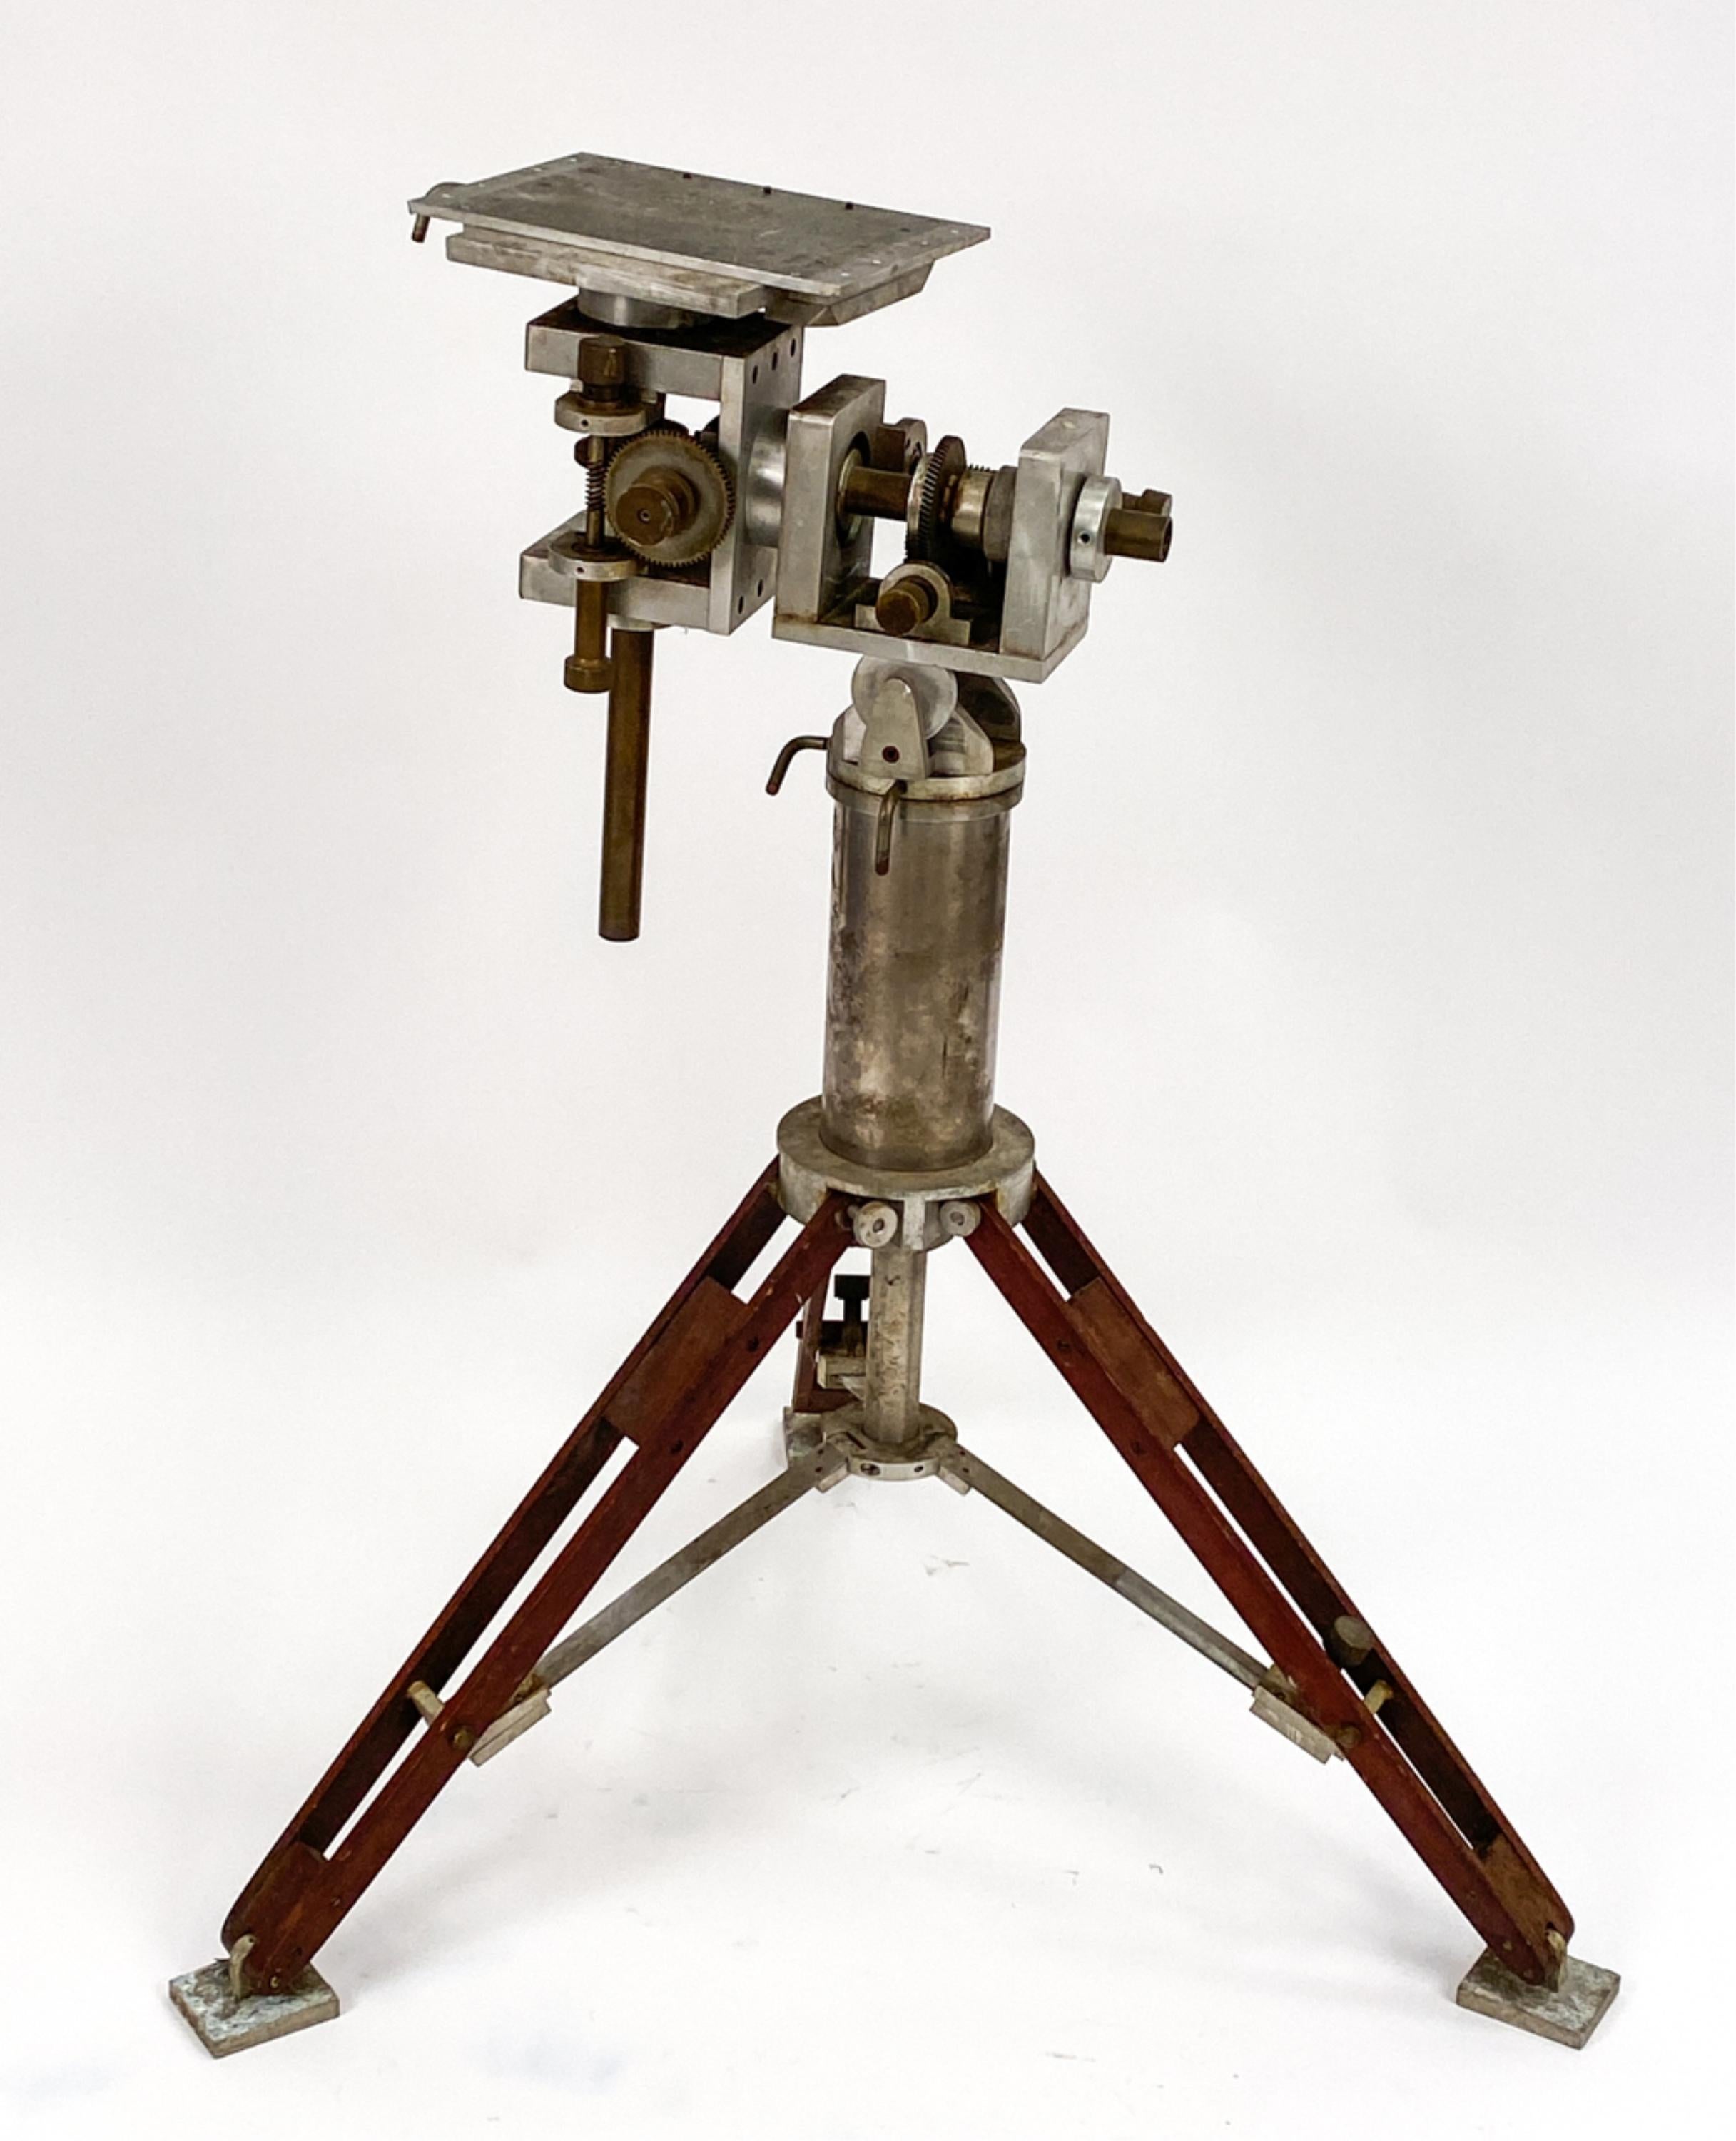 Introduce an element of industrial chic design to any interior with this vintage industrial metal tripod. This fabulous, functional stand can also be used as a decorative accent piece.